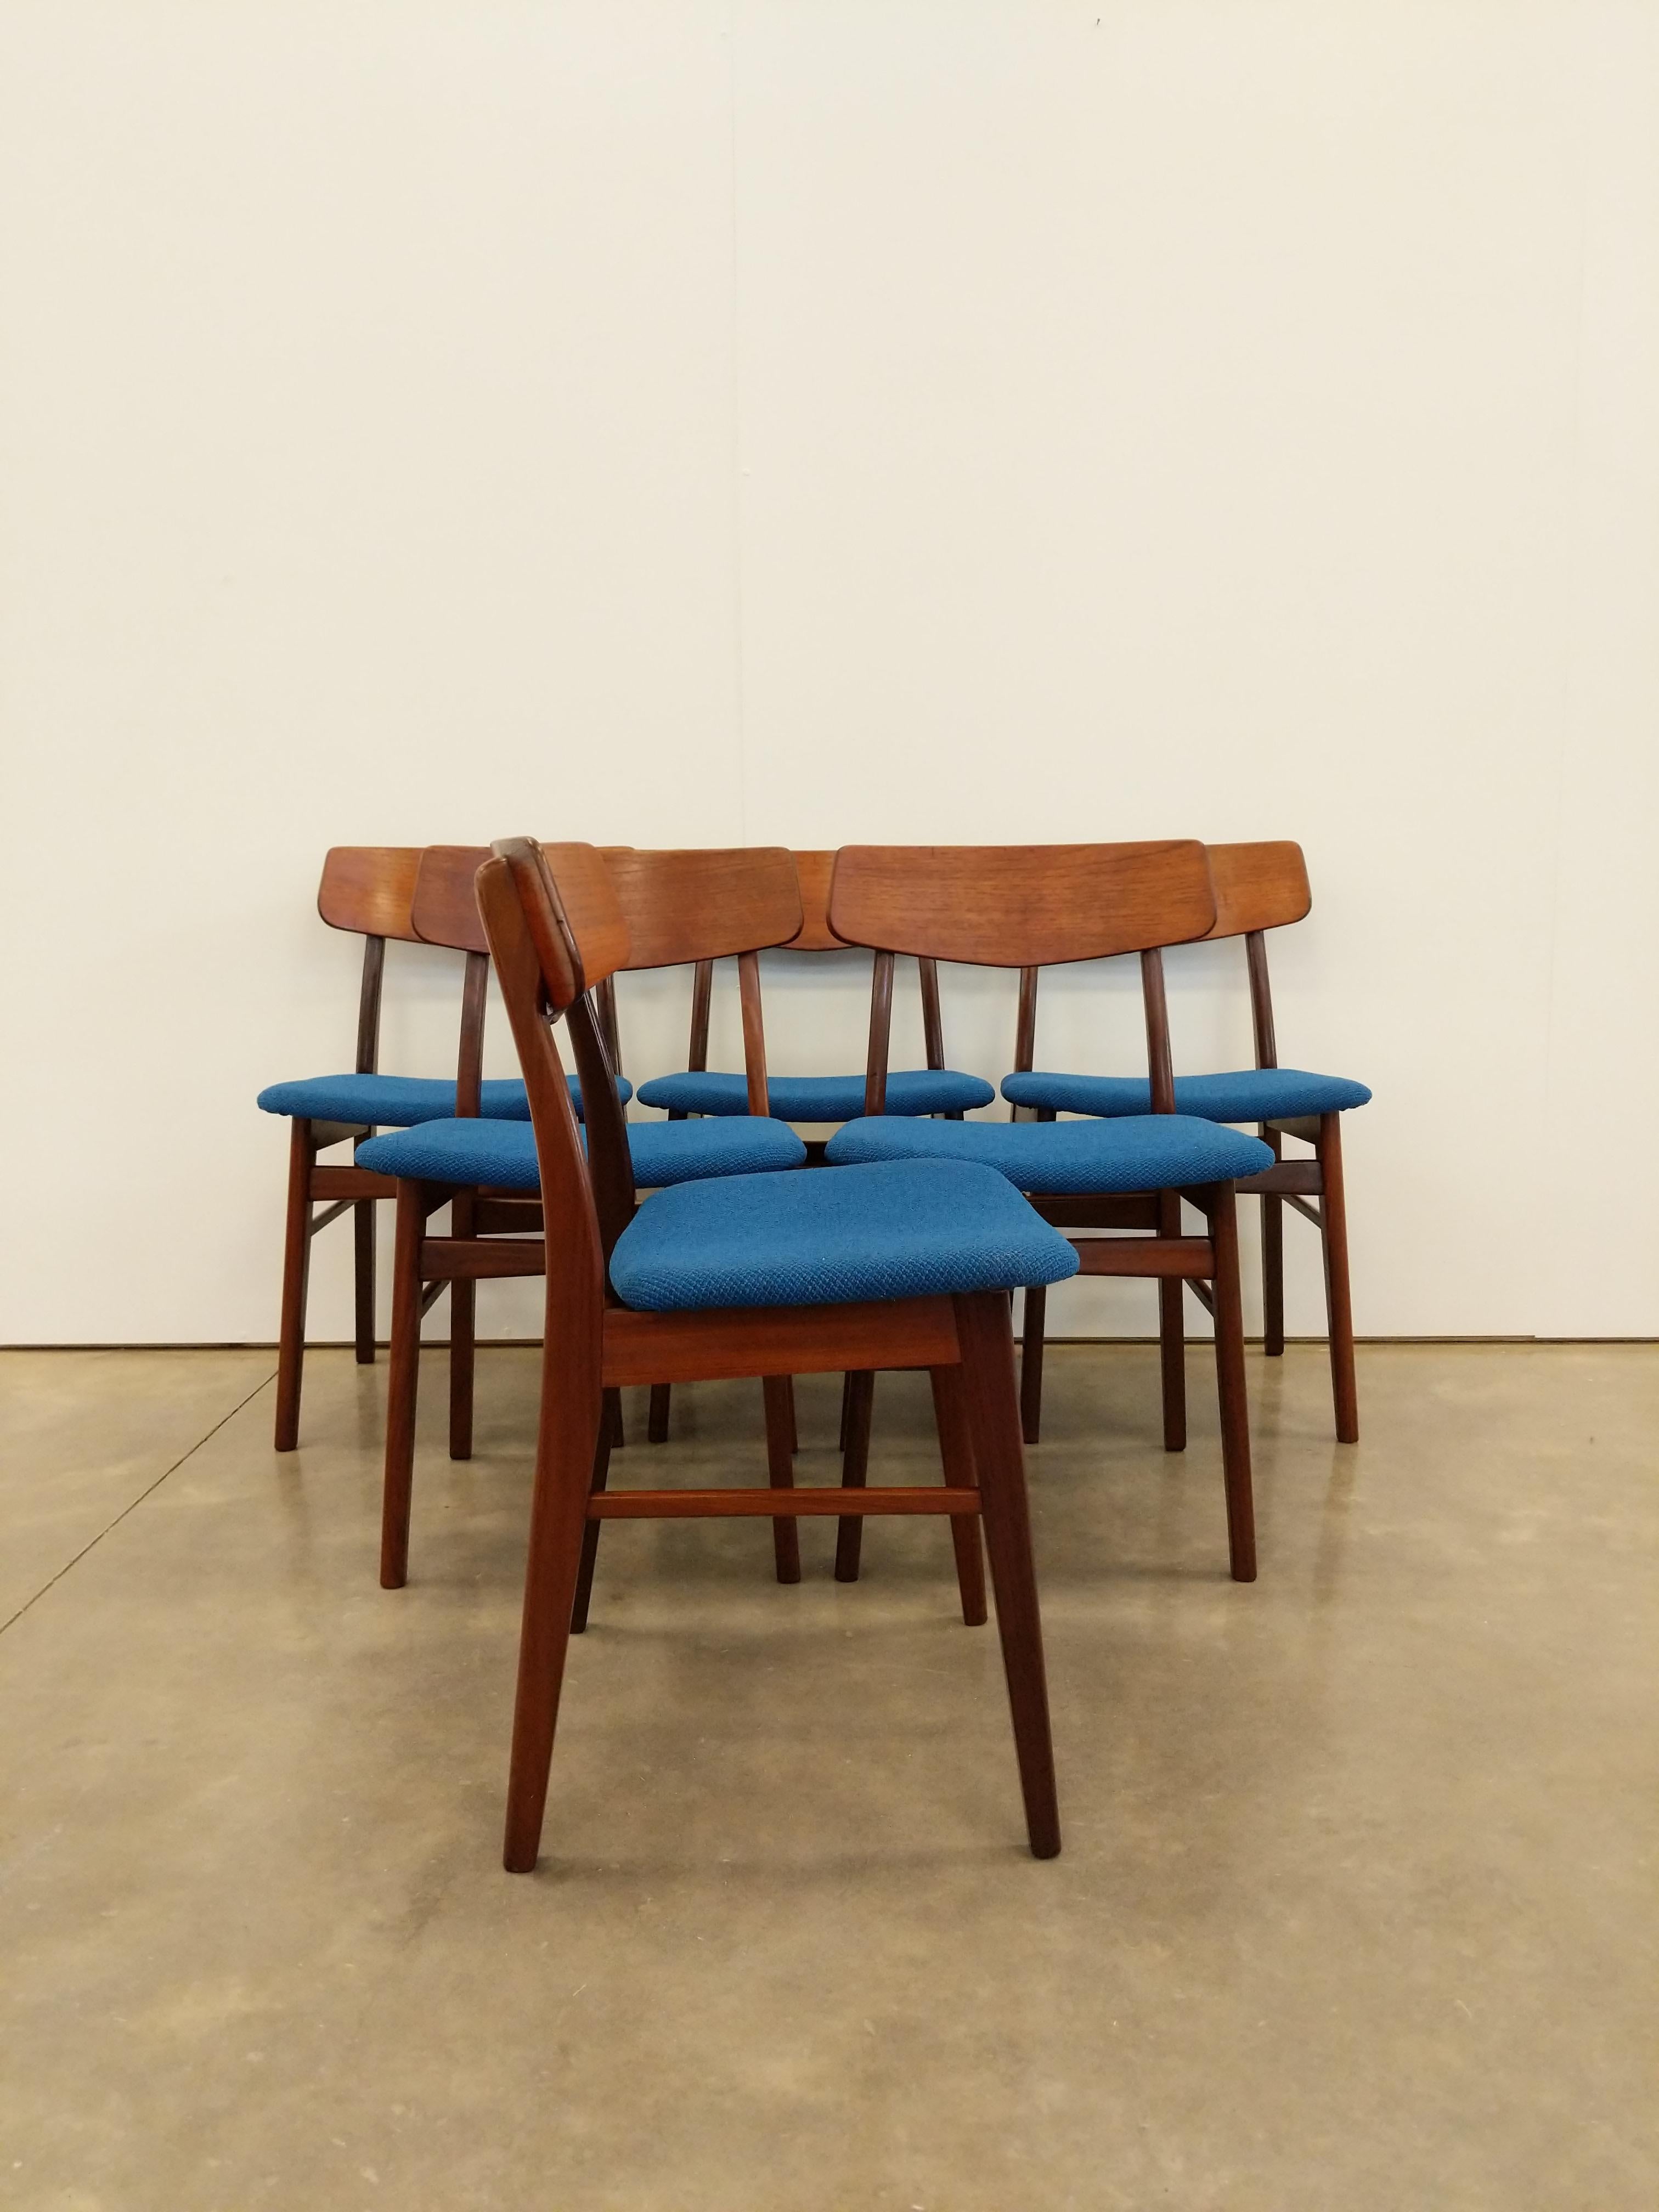 Set of 6 authentic vintage mid century Danish / Scandinavian Modern dining chairs.

This set is in excellent refurbished condition with brand new Knoll upholstery and few signs of age-related wear (see photos).

If you would like any additional